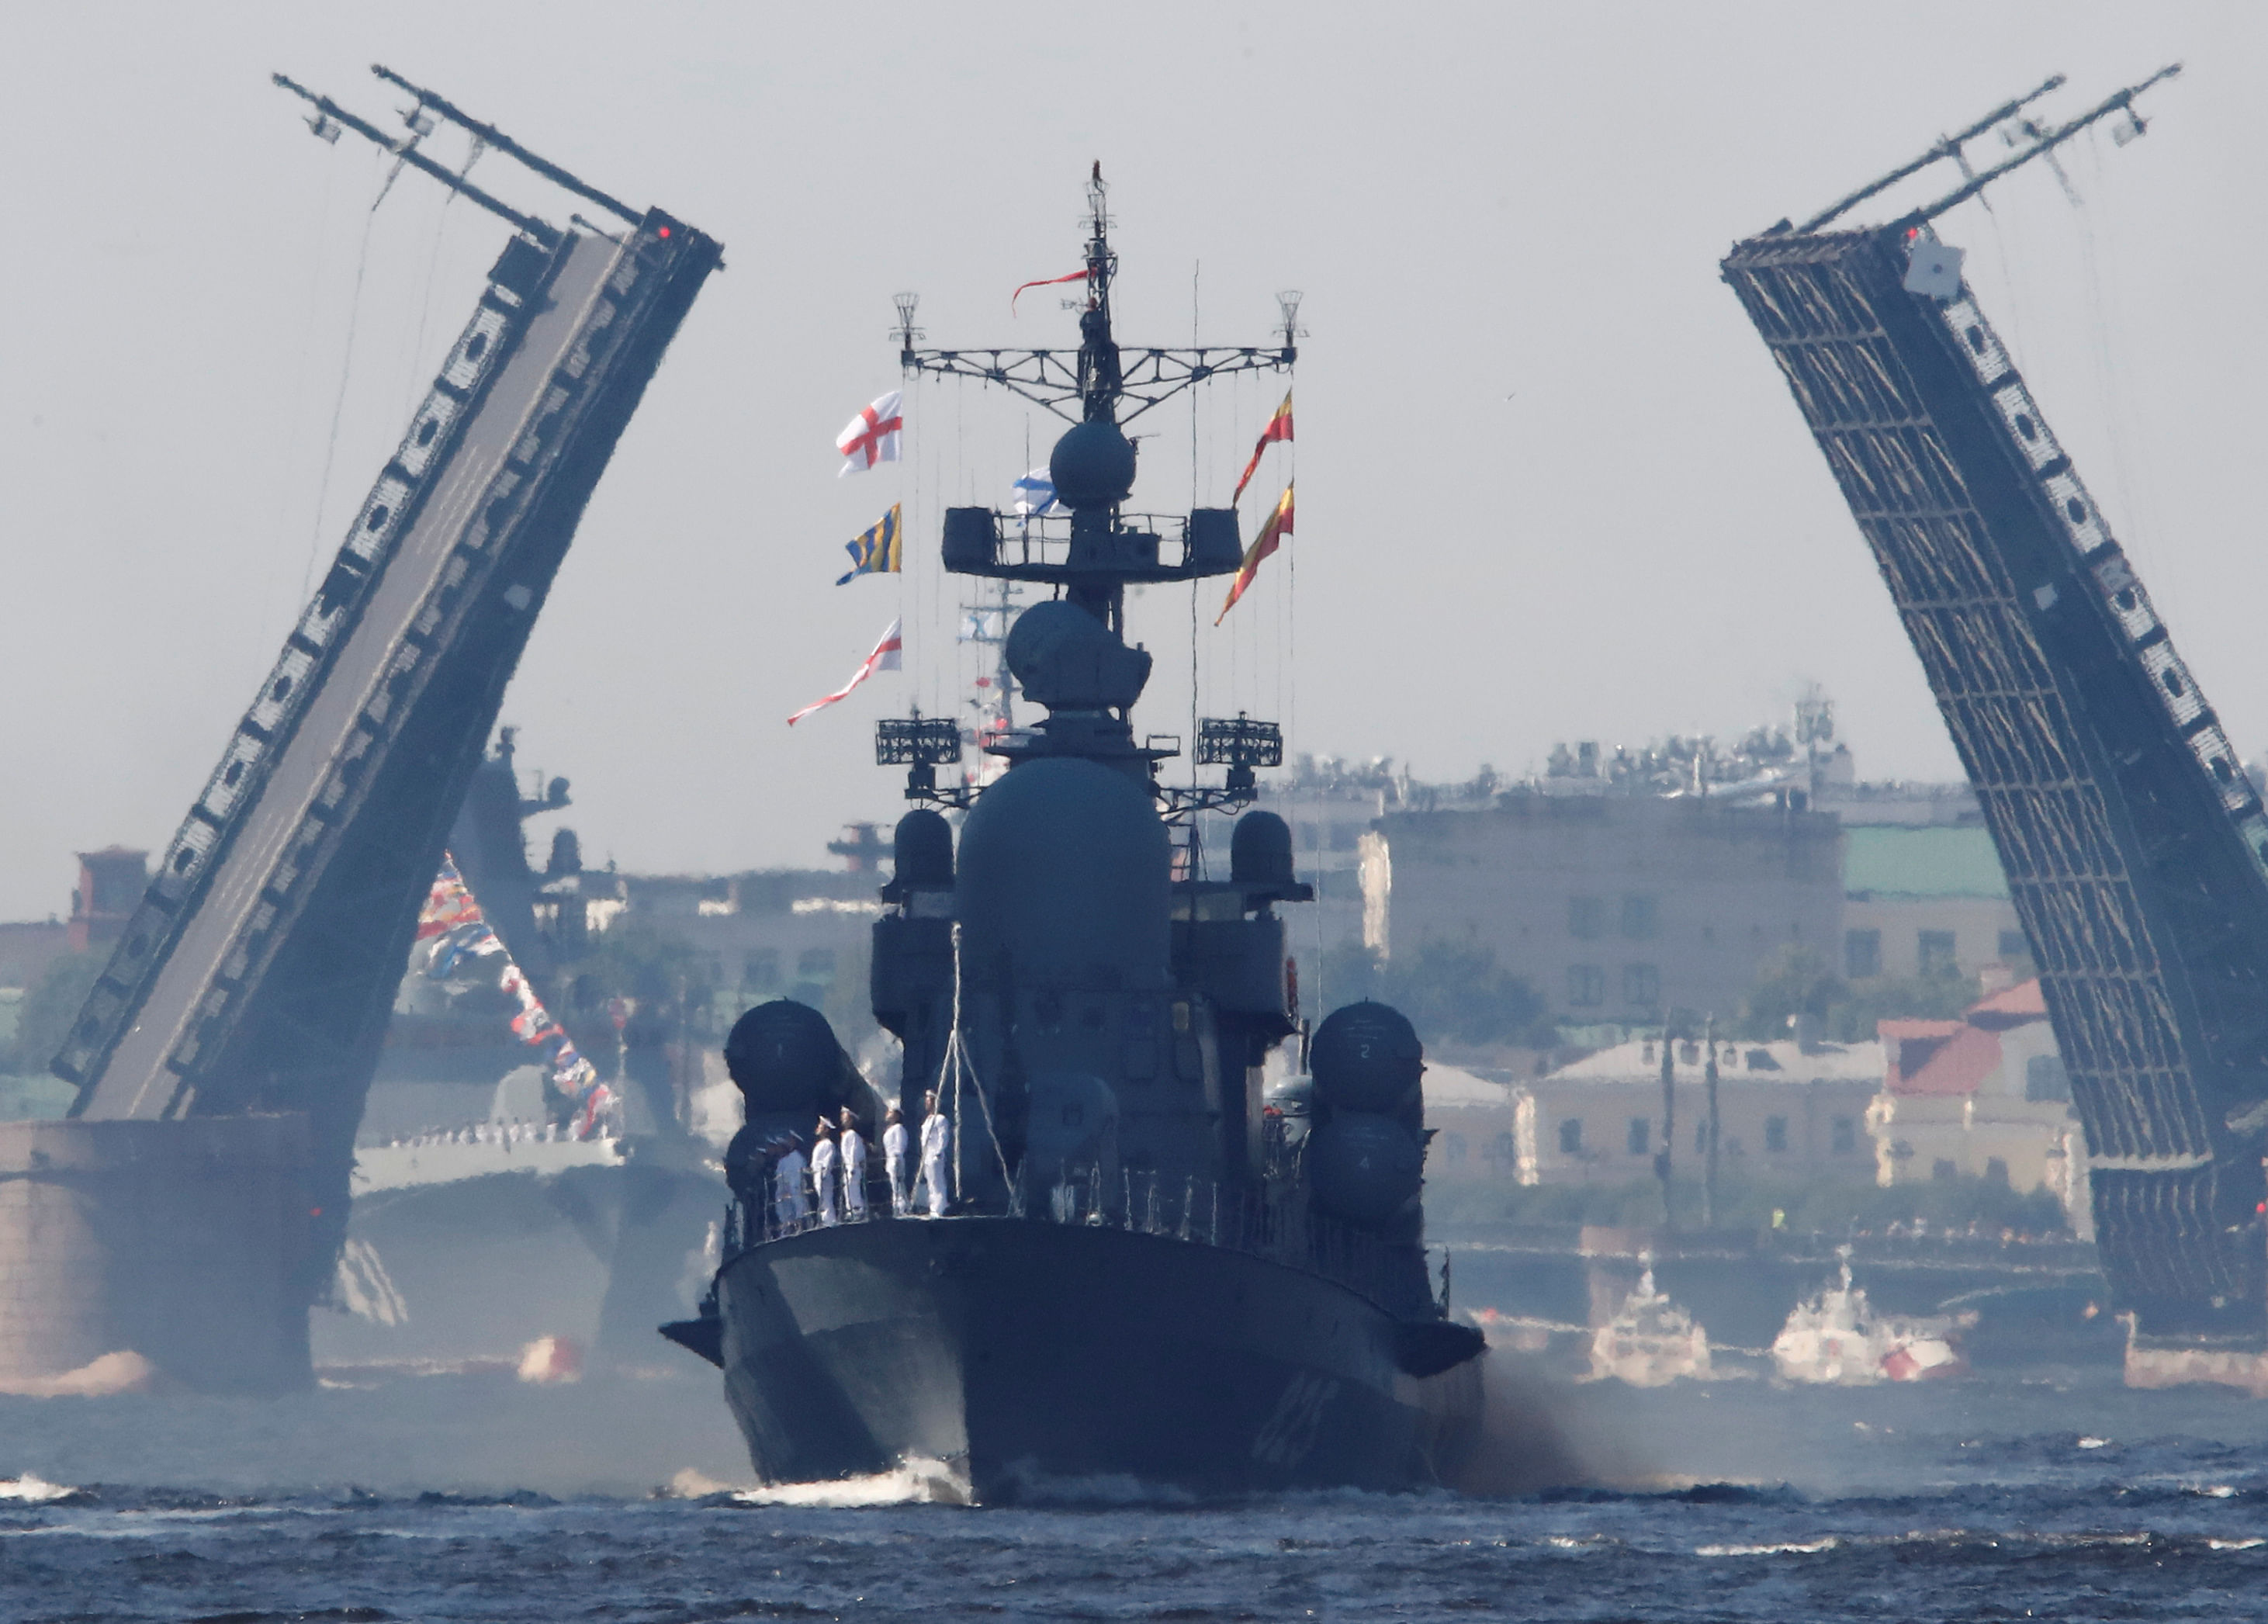 The Russian Navy's missile corvette Dmitrovgrad sails along the Neva River during a rehearsal for the Navy Day parade in Saint Petersburg, Russia July 19, 2020. Credit: REUTERS